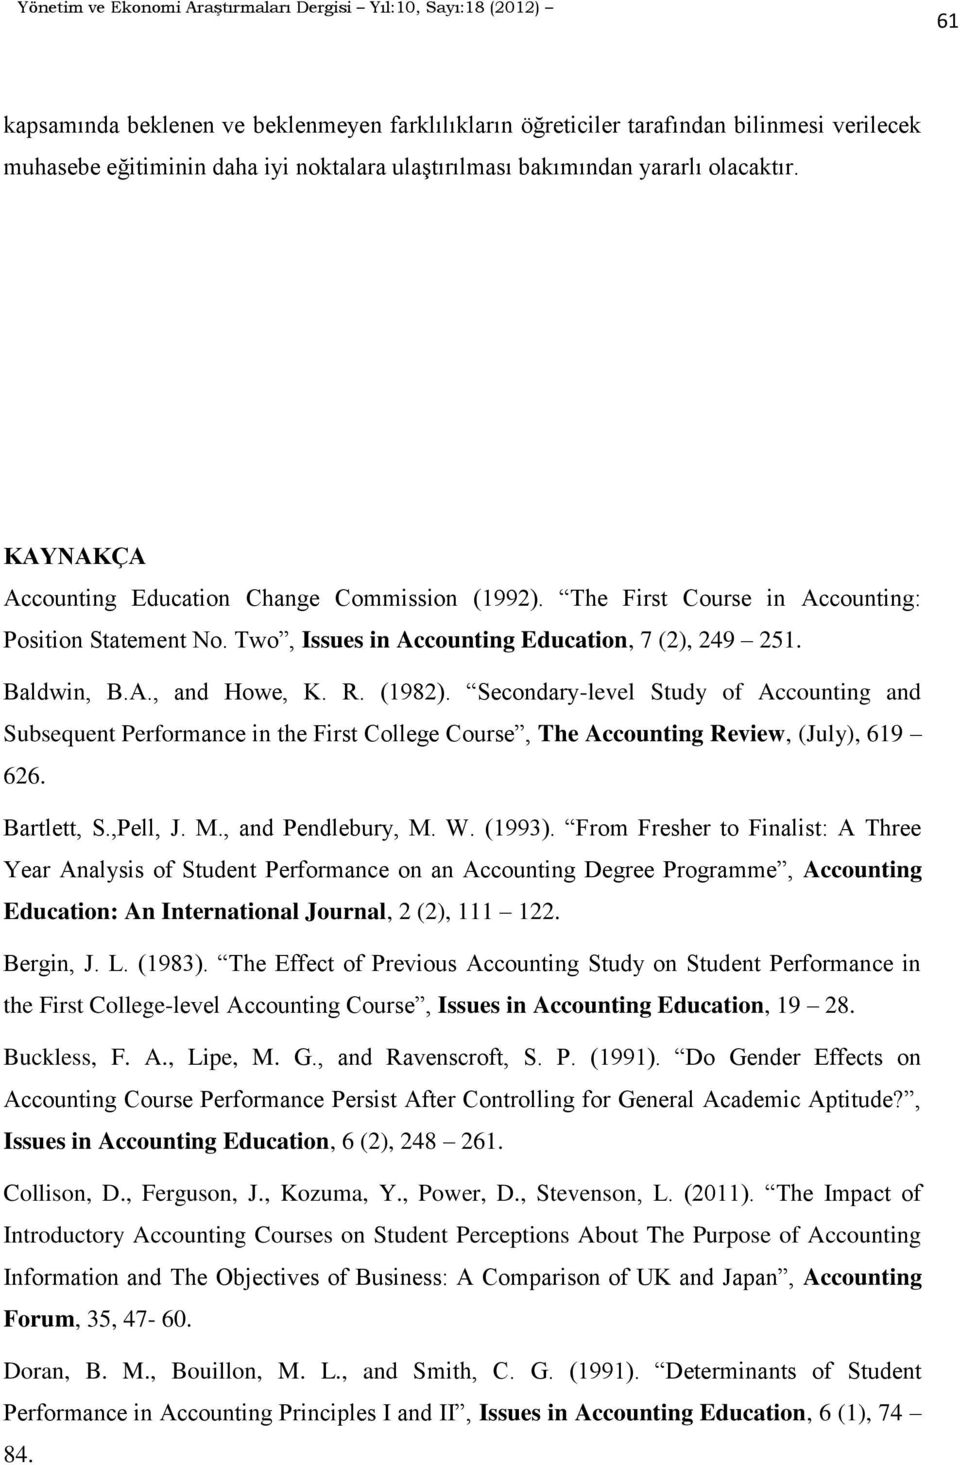 (1982). Secondary-level Study of Accounting and Subsequent Performance in the First College Course, The Accounting Review, (July), 619 626. Bartlett, S.,Pell, J. M., and Pendlebury, M. W. (1993).